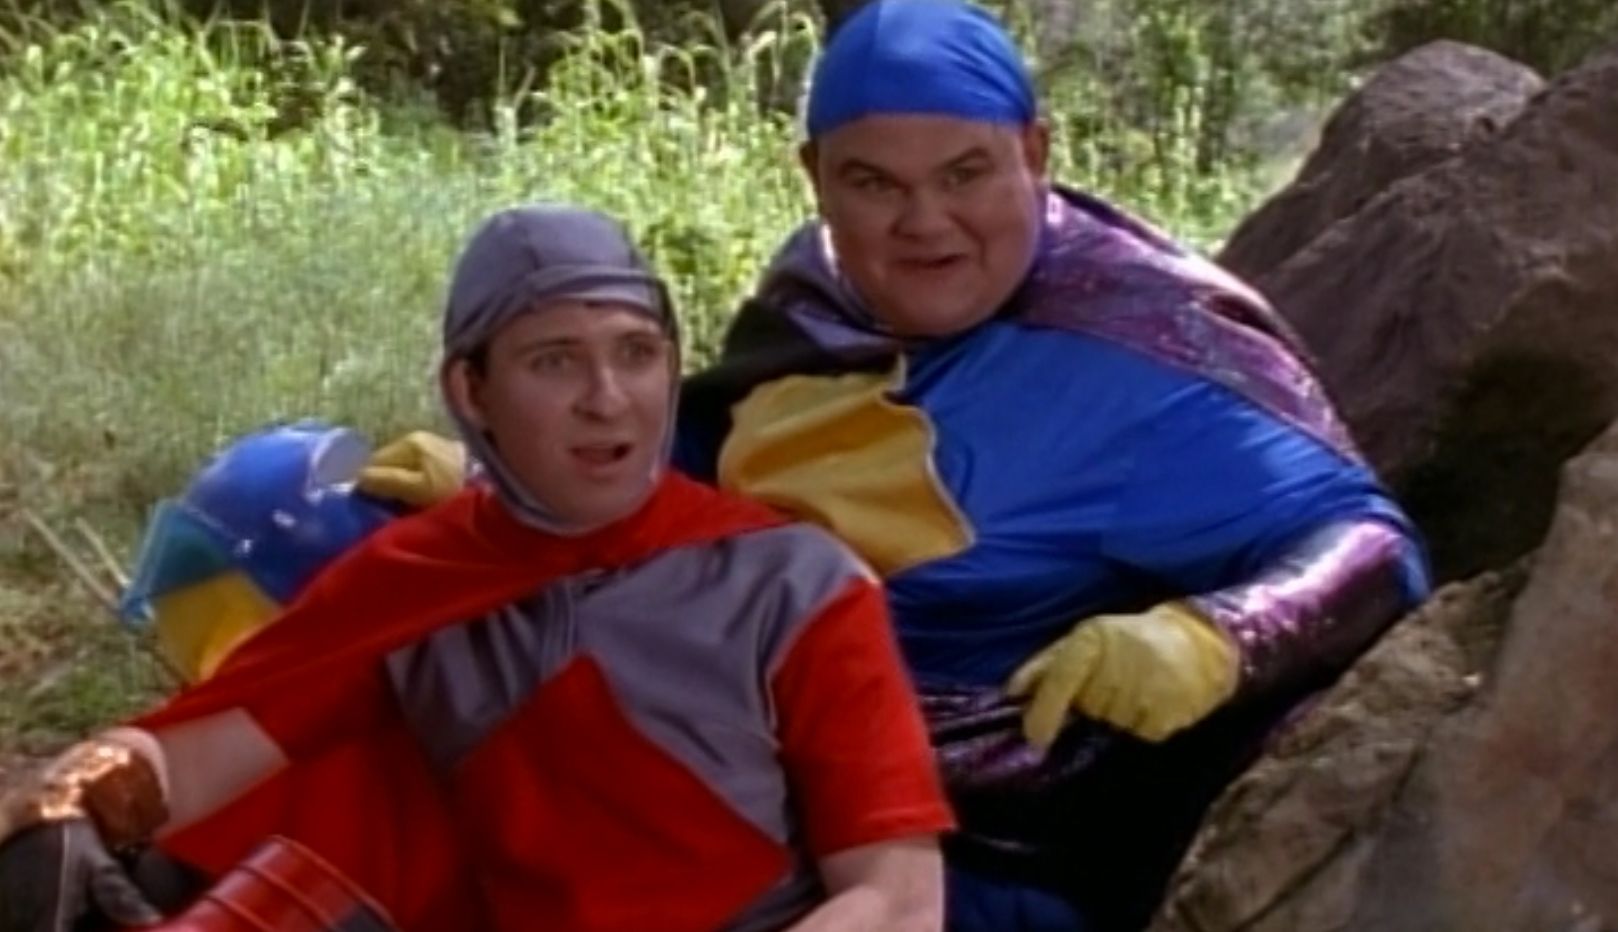 Bulk and Skull pretend to be Power Rangers in Mighty Morphin Power Rangers A Friend In Need